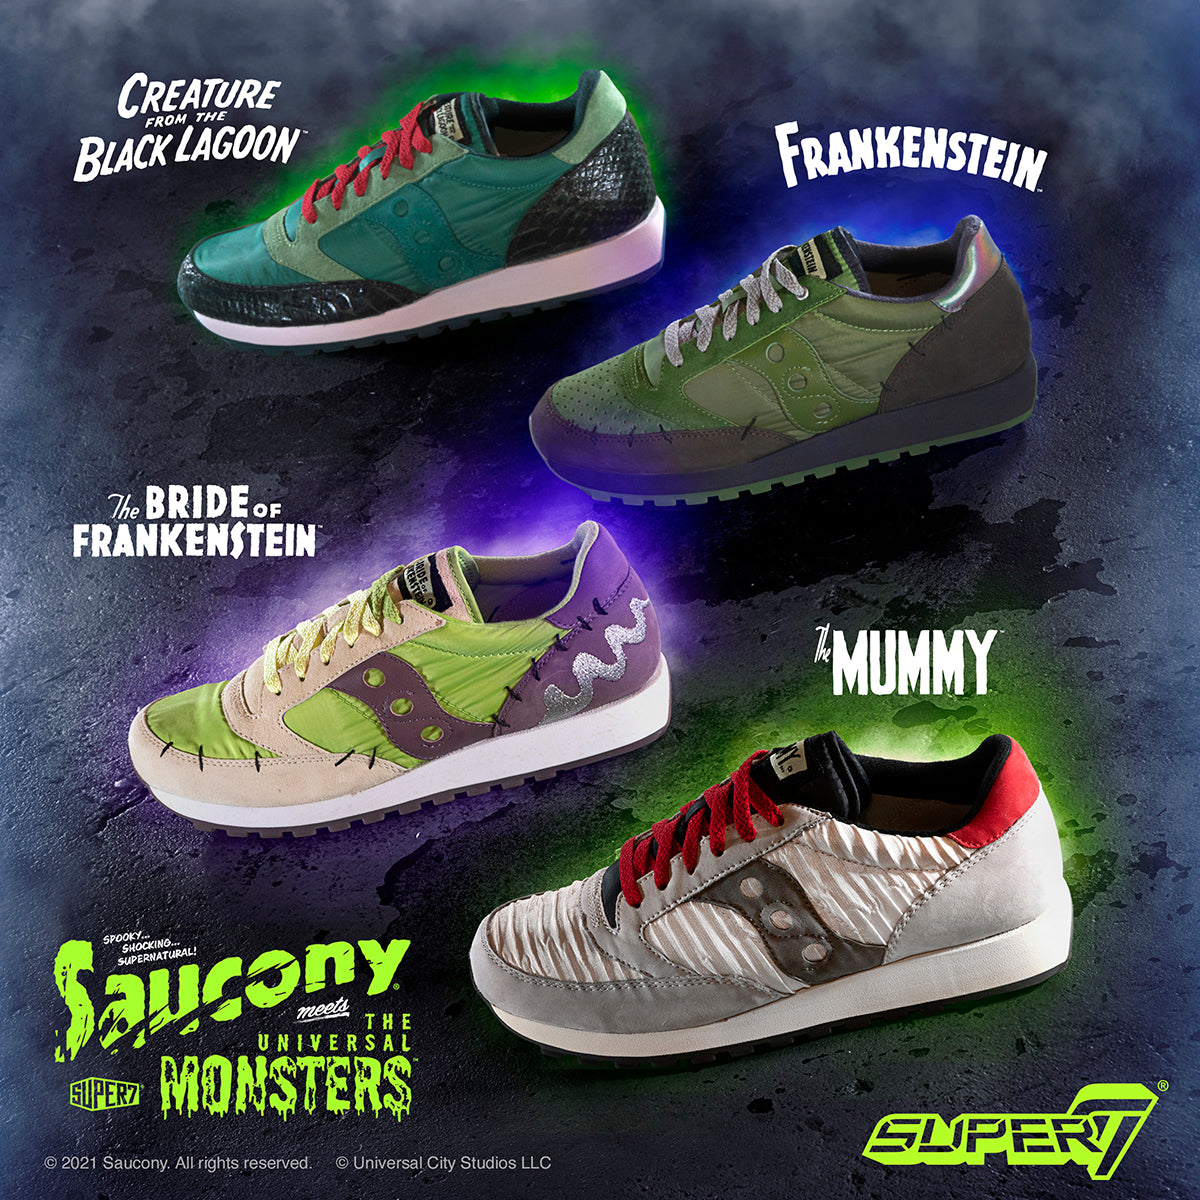 Alive! Super7 Saucony Up Again for Monsters Sh